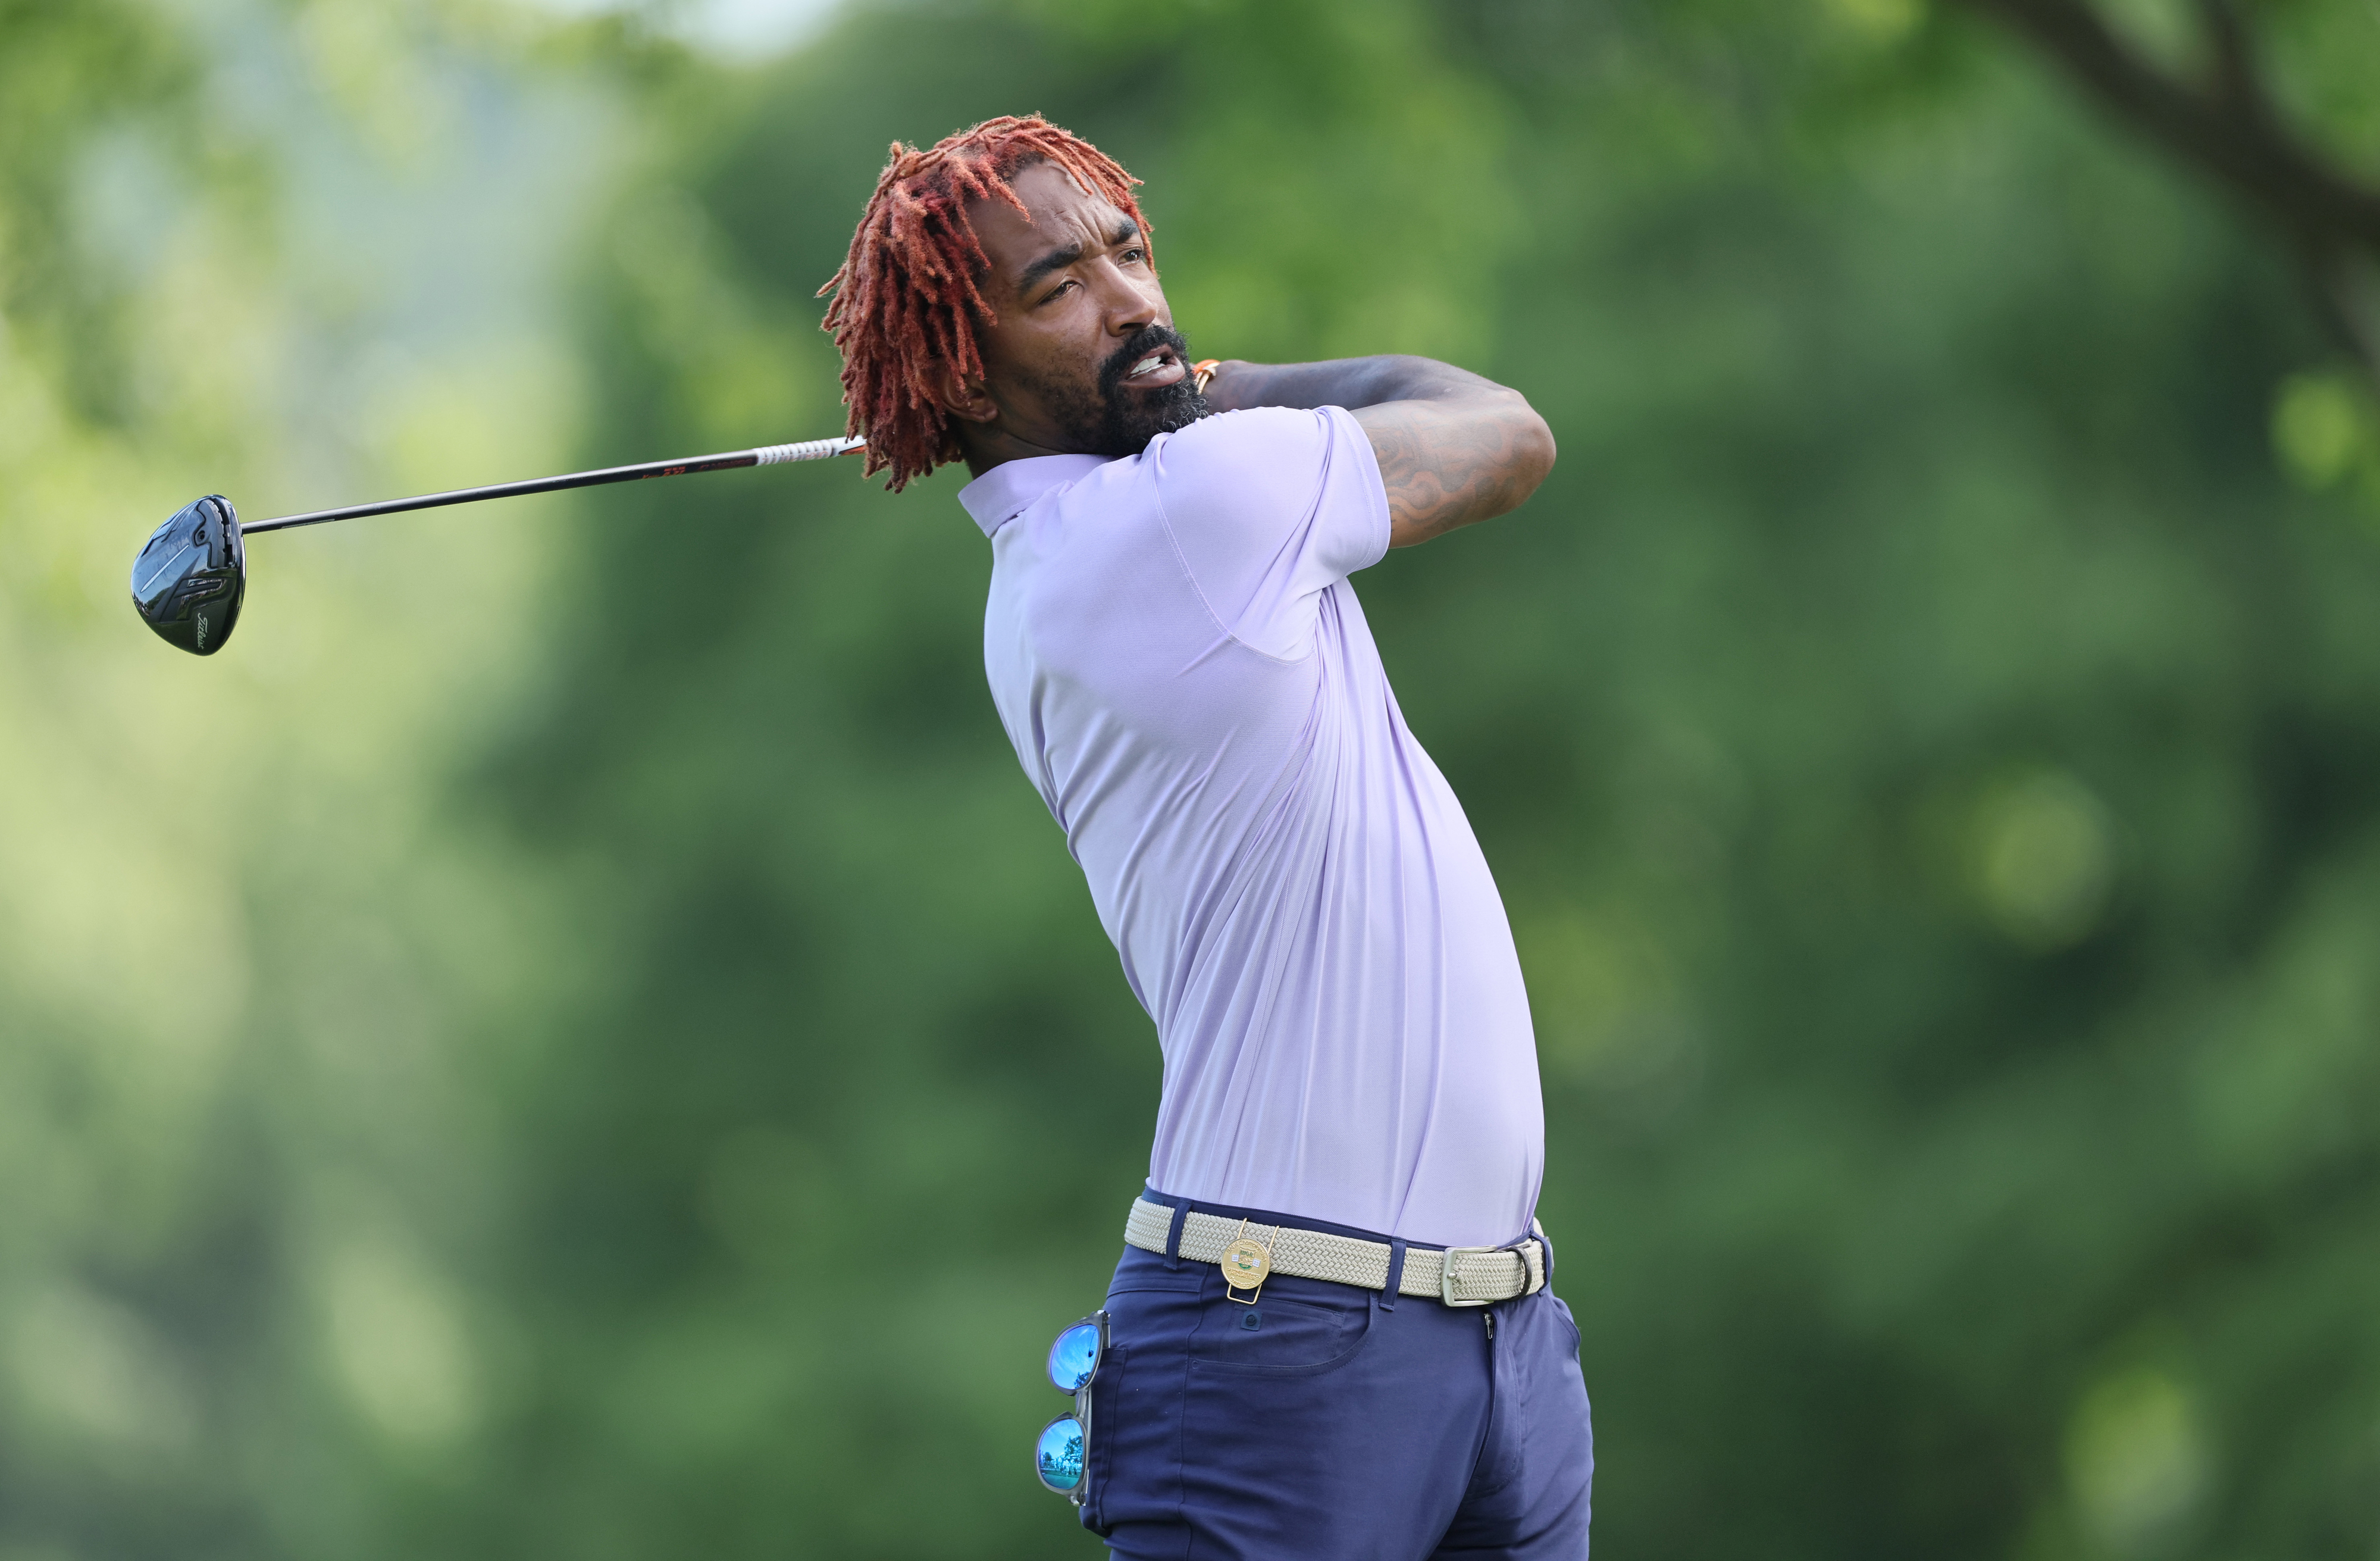 Golfer mid-swing on a course, dressed in a polo shirt and trousers, focused on the ball